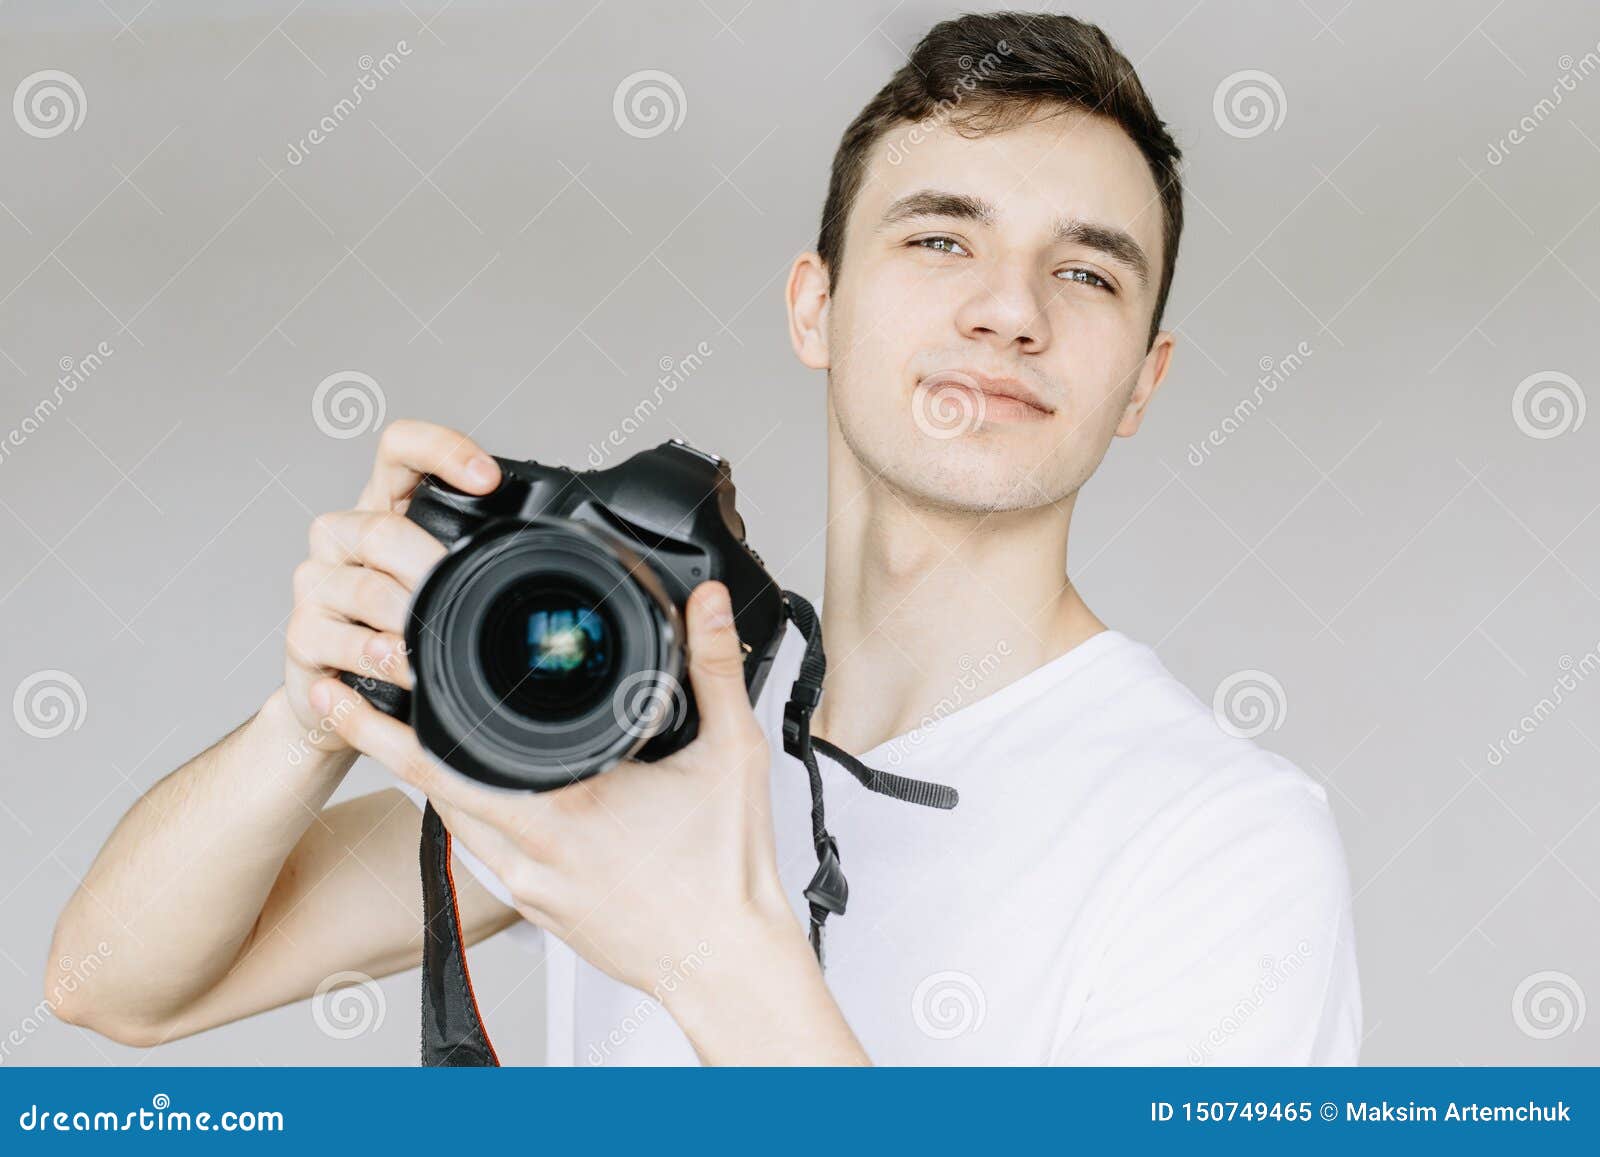 a young man holds a photo camera in his hand and looks straight.  gray background